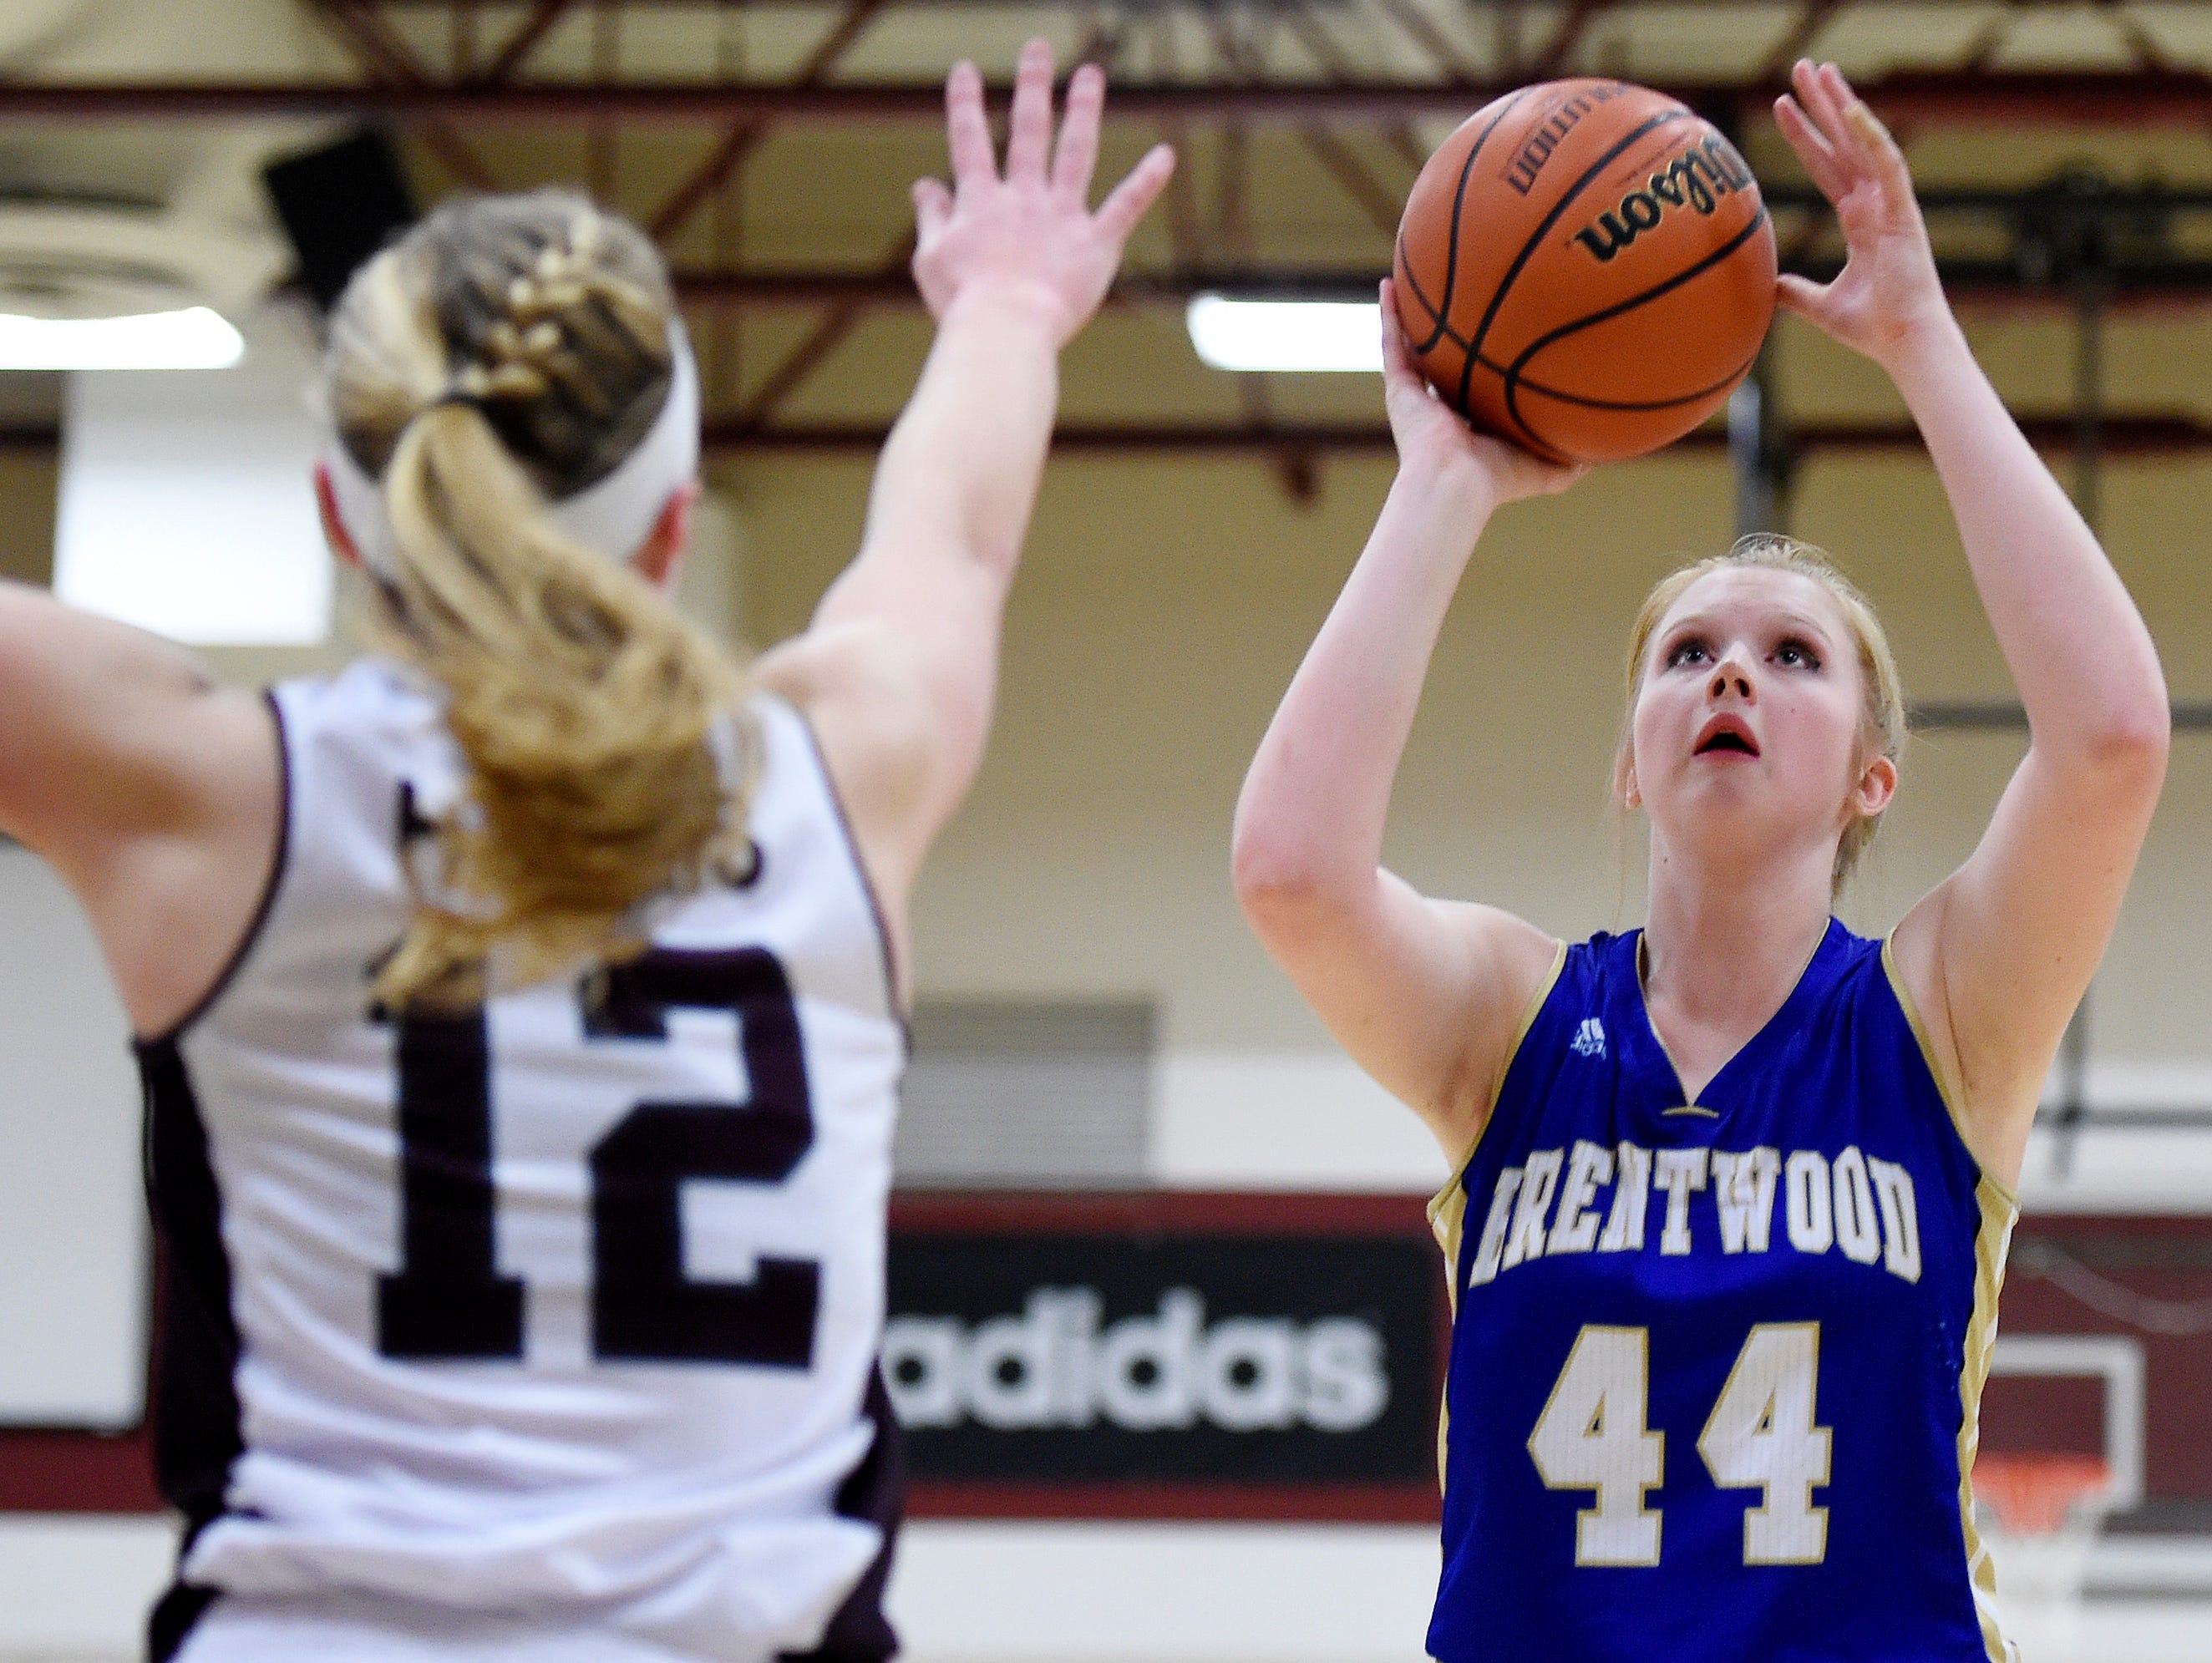 Brentwood's AK Lawrence (44) shoots over Franklin's Holly Harris (12) during the second half at Franklin High School, Tuesday, Feb. 16, 2016, in Franklin, Tenn.